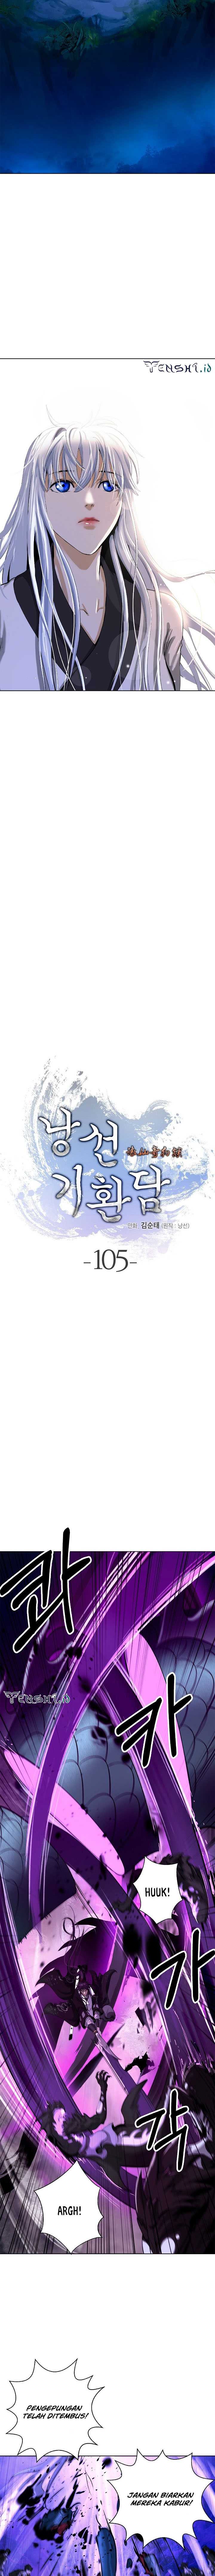 Cystic Story (Call The Spear) Chapter 105